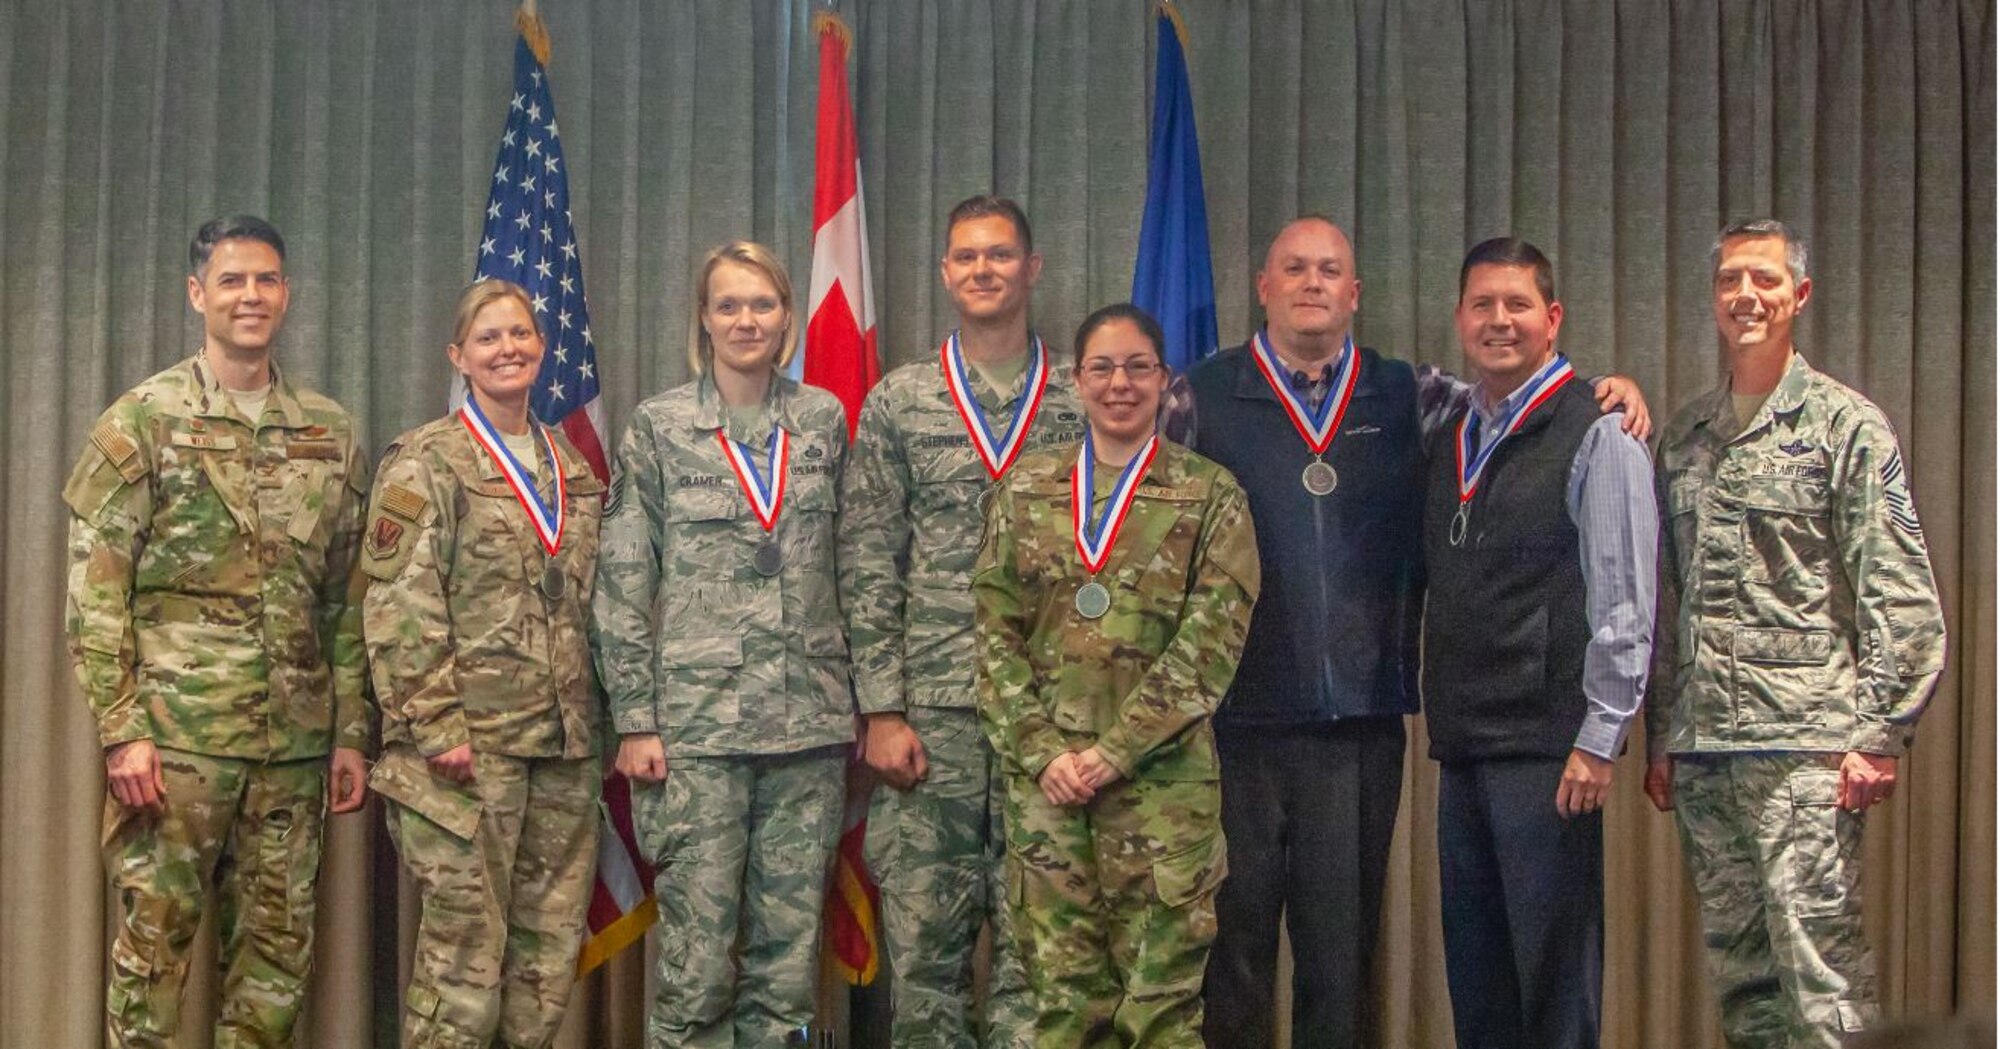 The 2018 552nd Air Control Wing annual award winners pose for a photo Feb. 22, 2019, at the Tinker Event Center. Front row: Col. Geoffrey Weiss, 552nd ACW Commander; Maj. Katherine Onstad; Master Sergeant Mary Cramer; Capt. Sean Stephens; Tech. Sgt. Heather King; Christopher Guth; Patrick Wilson; and Chief Master Sgt. Raymond Mott, 552nd ACW command chief. Missing: Senior Airman Brielle Golden; Senior Master Sgt. Justin Stacey; and Jenny Smith. (U.S. Air Force photo Master Sgt. Michael Remillard).